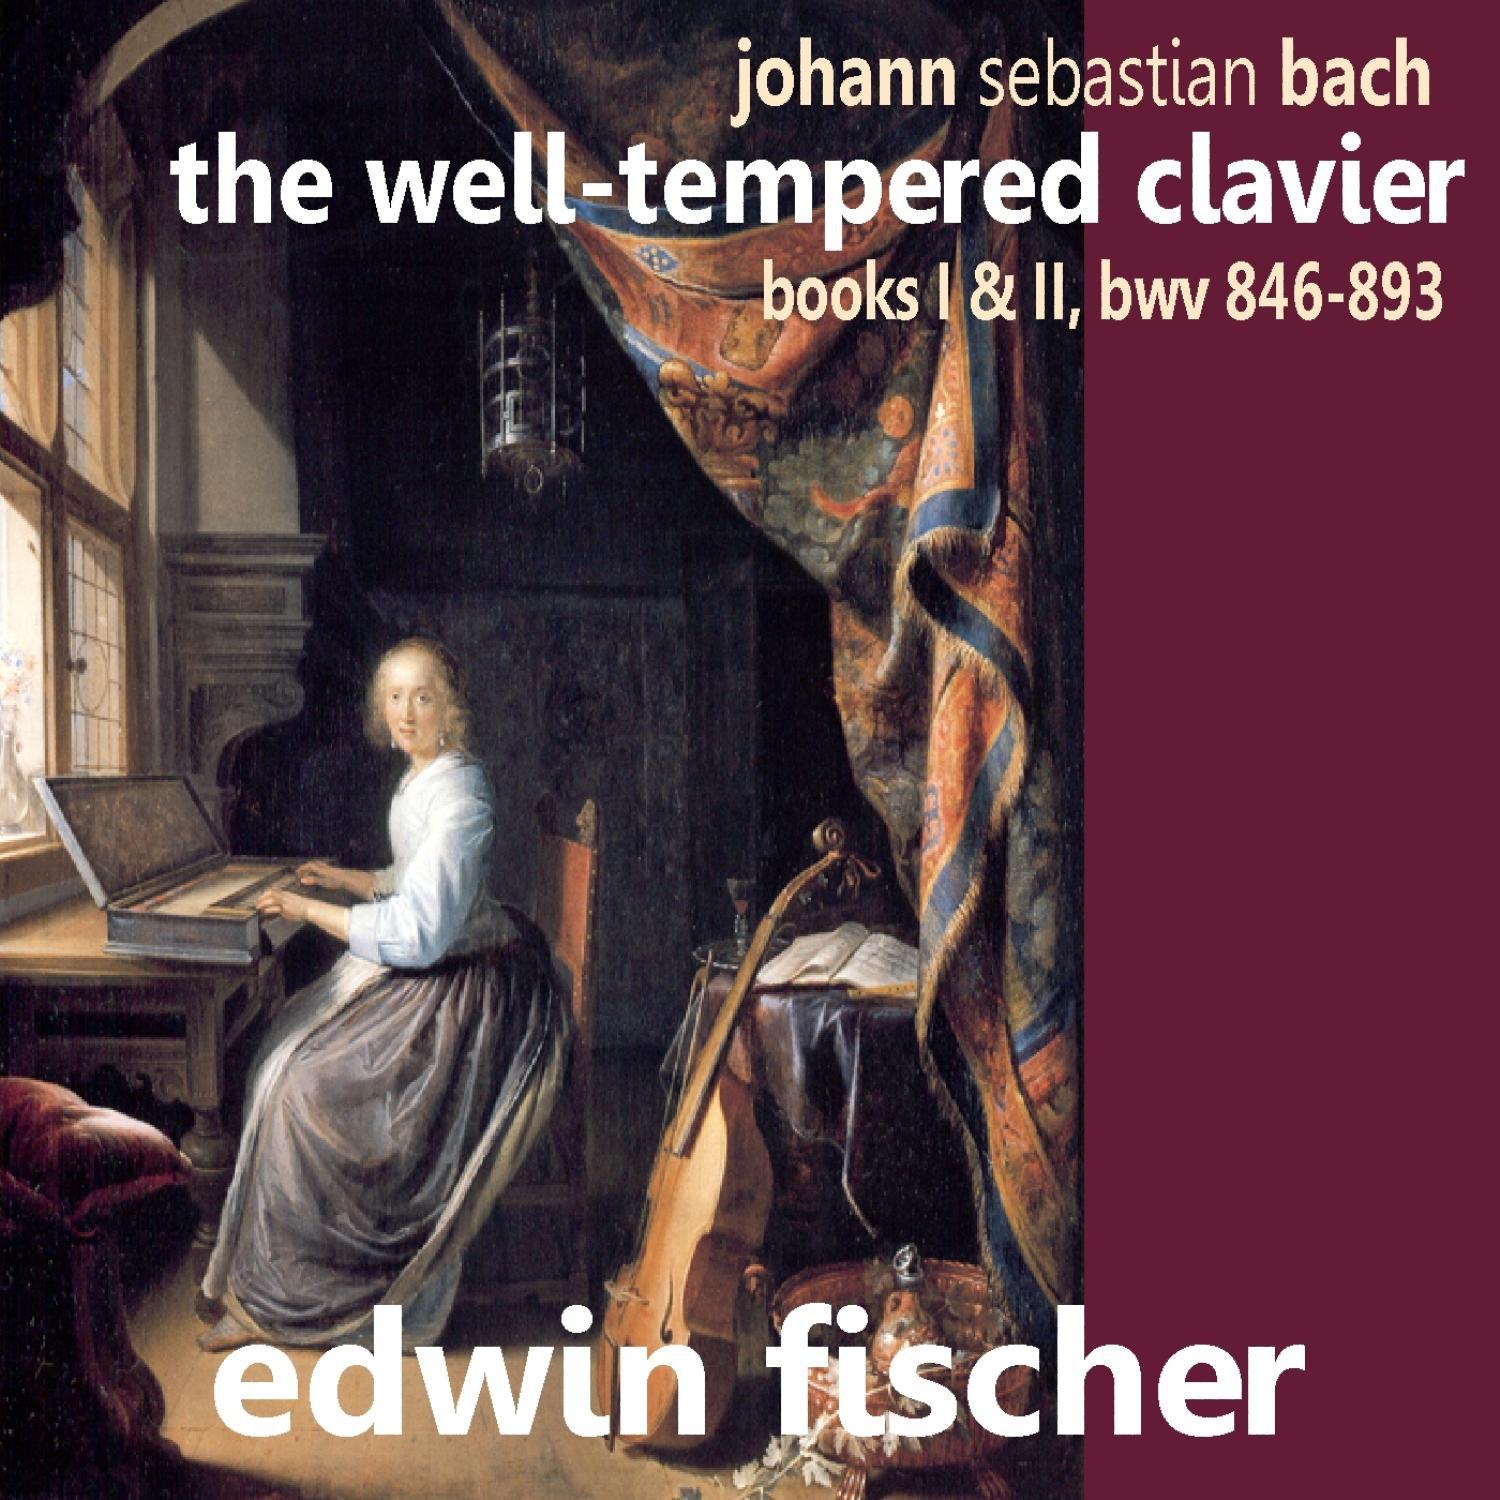 Book II, Prelude and Fugue No. 21 in B Flat Major, BWV 890